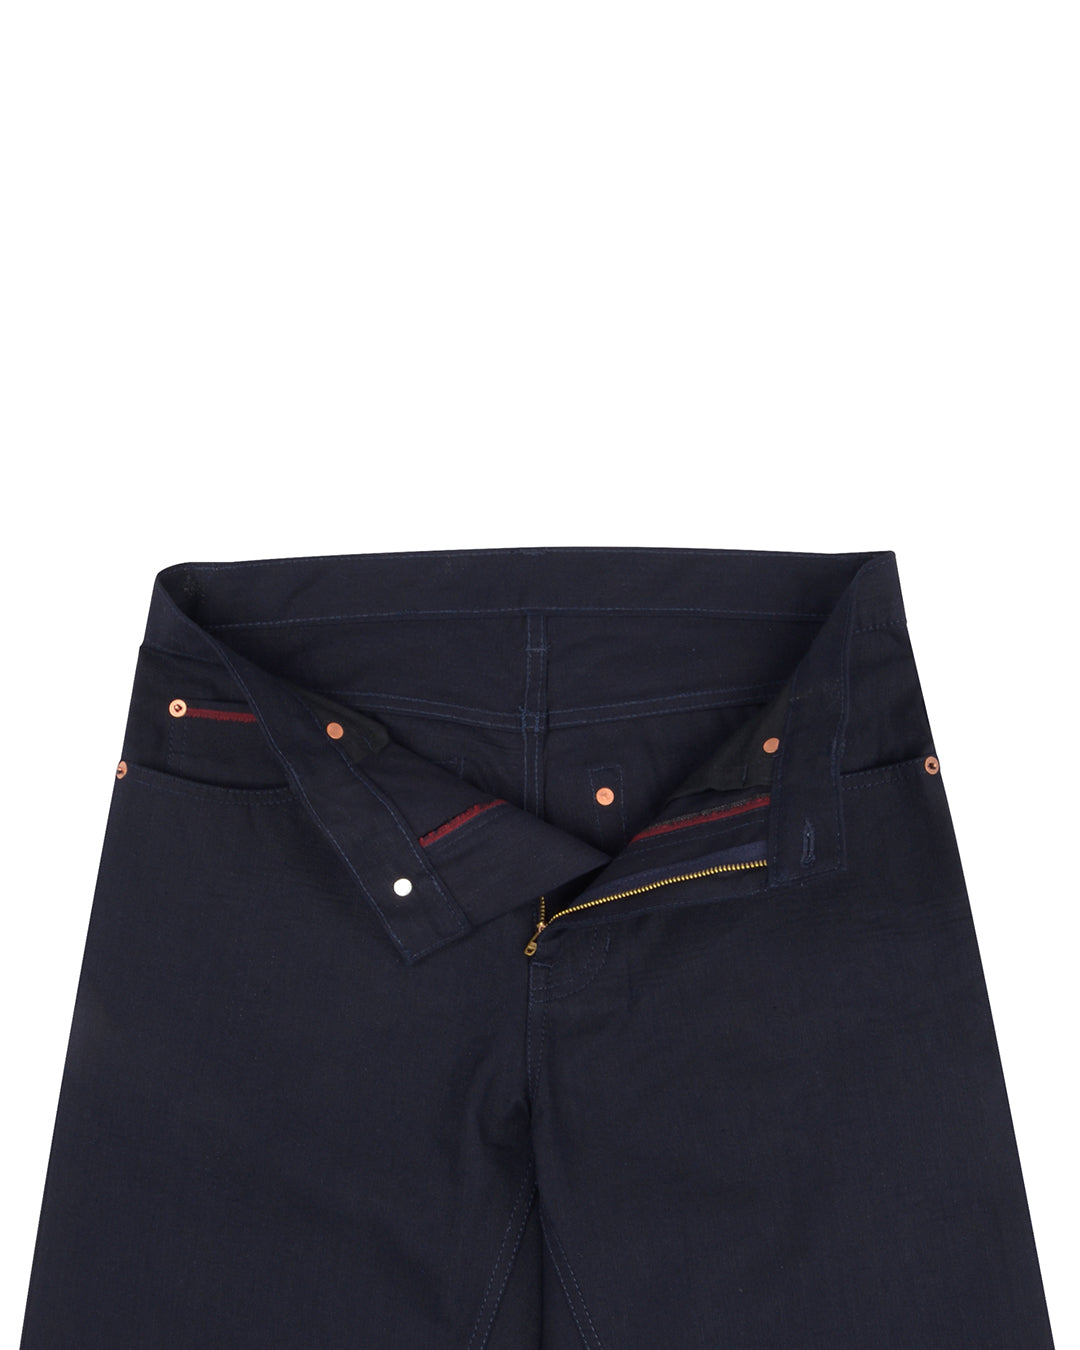 Front open view of custom chino jeans for men by Luxire in navy